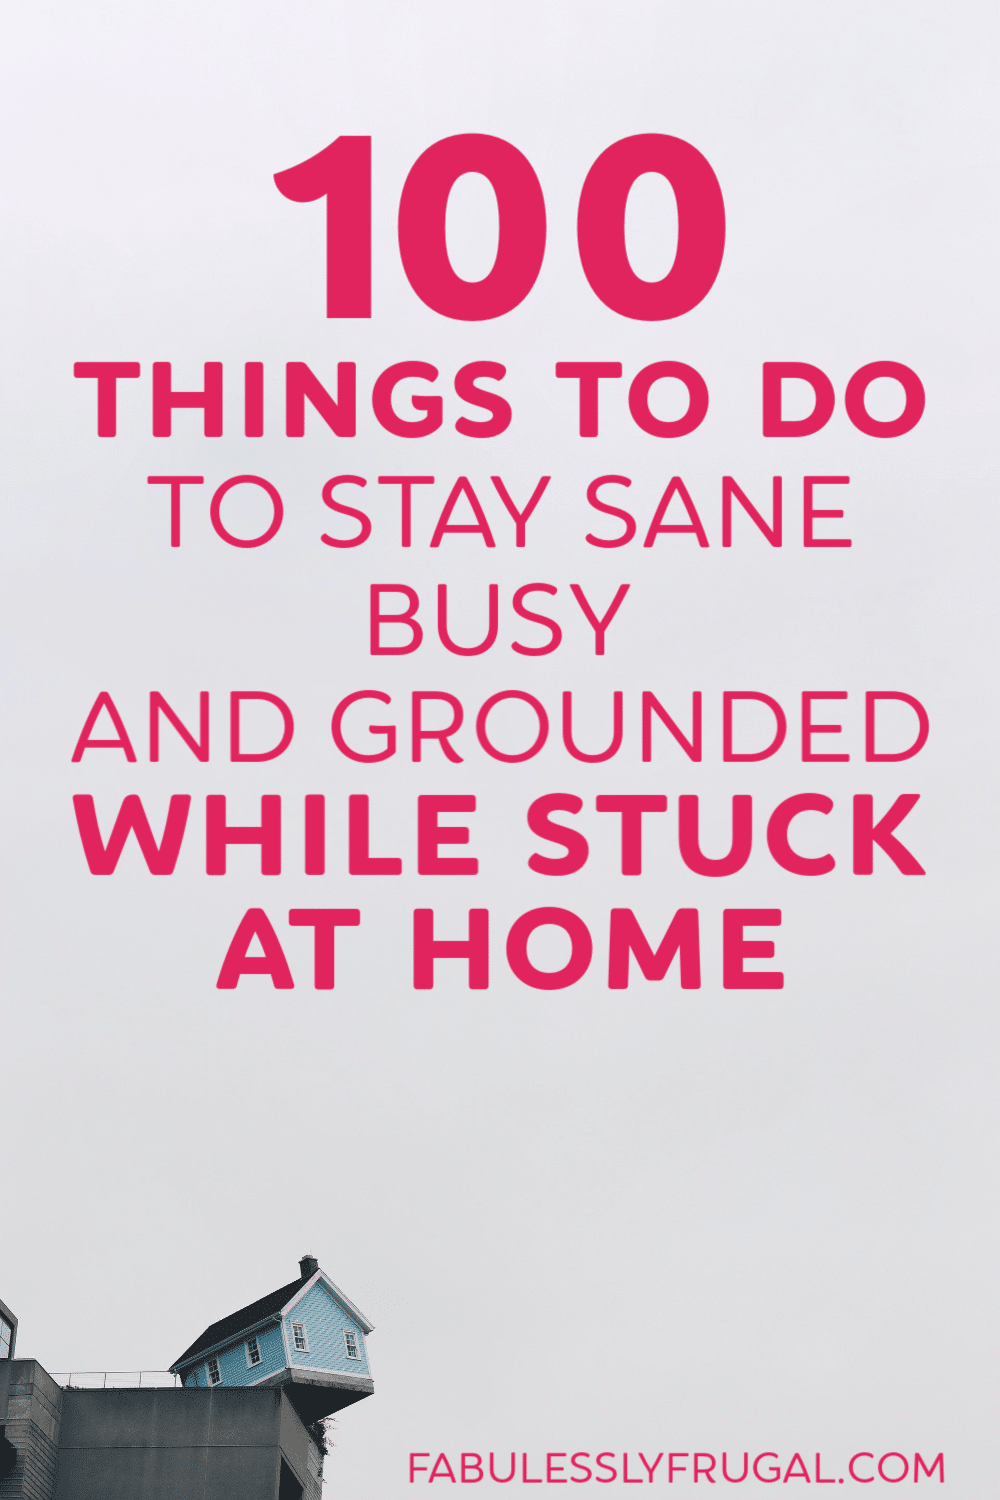 Things to do while stuck at home